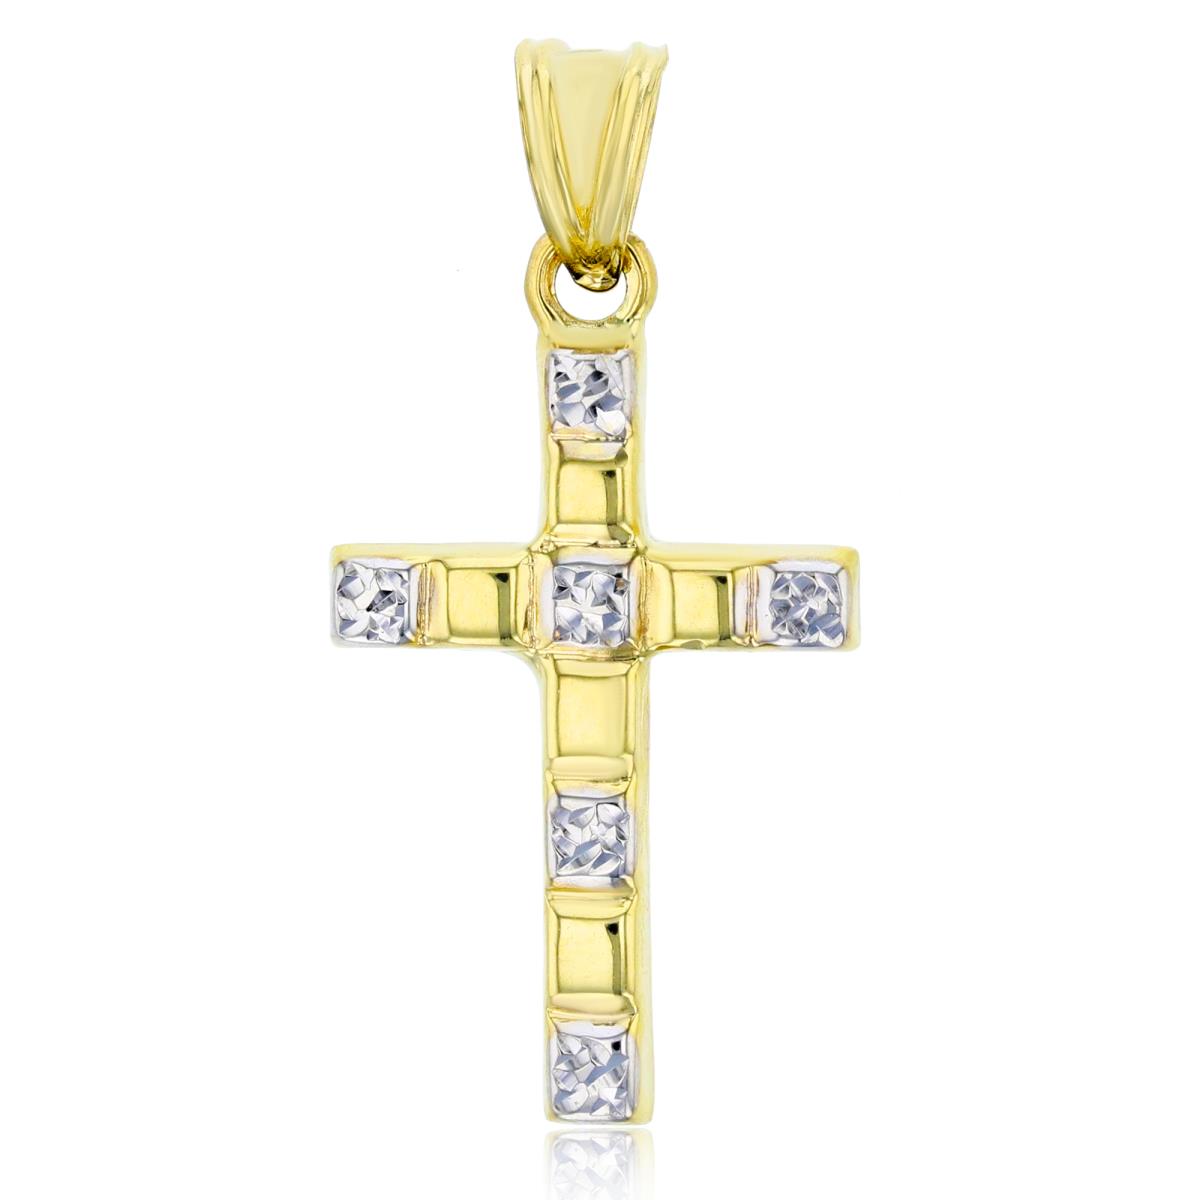 14K Two-Tone Gold 35x17mm Polished & DC Puzzle Cross Pendant